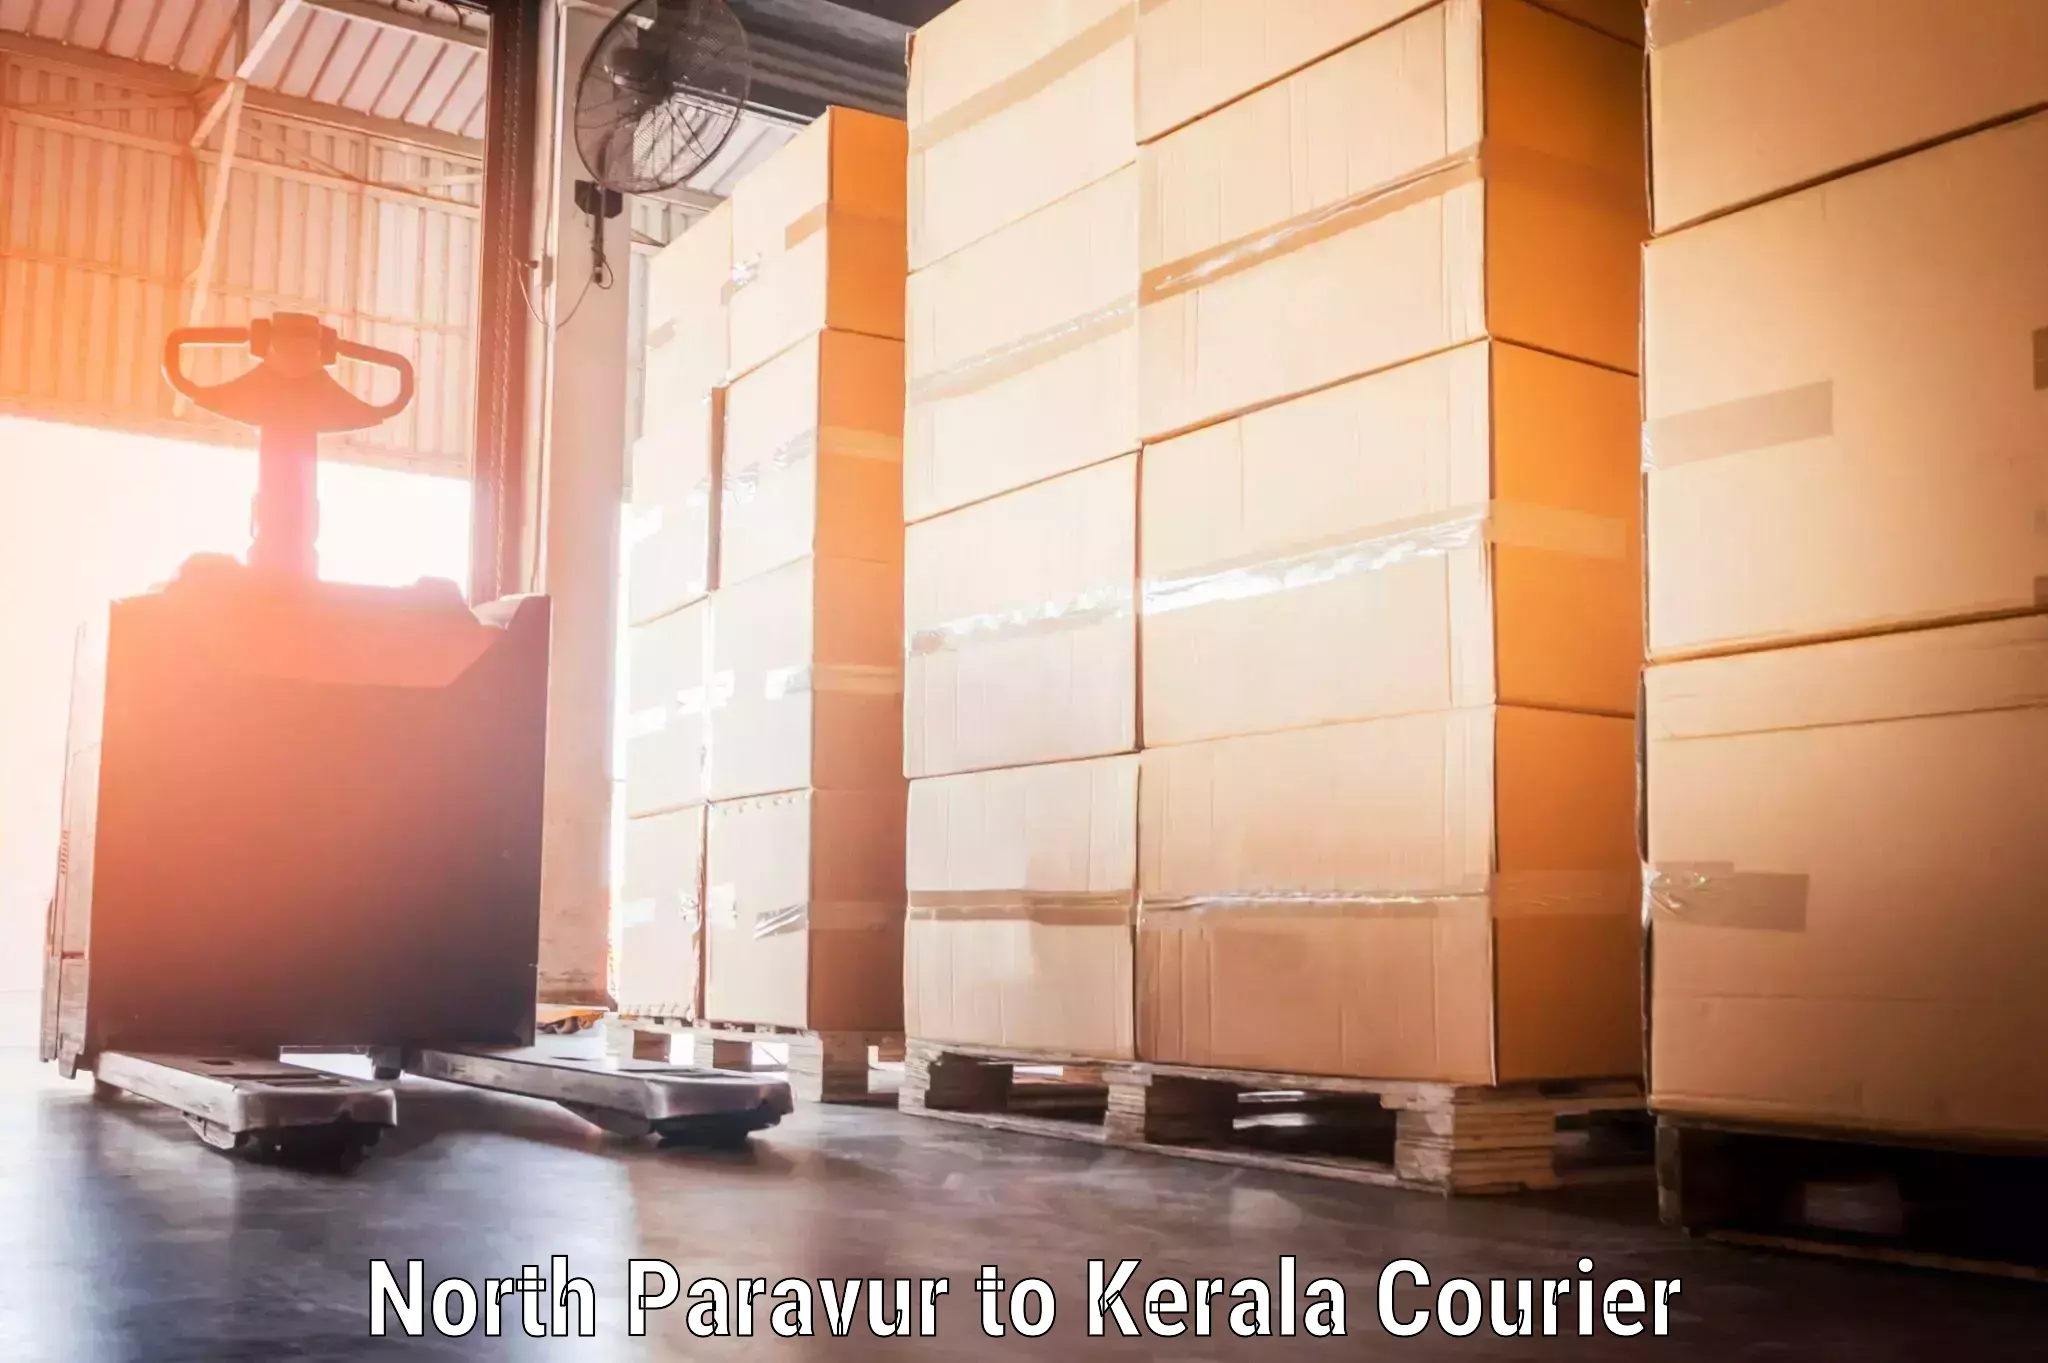 Scheduled baggage courier North Paravur to Cochin Port Kochi